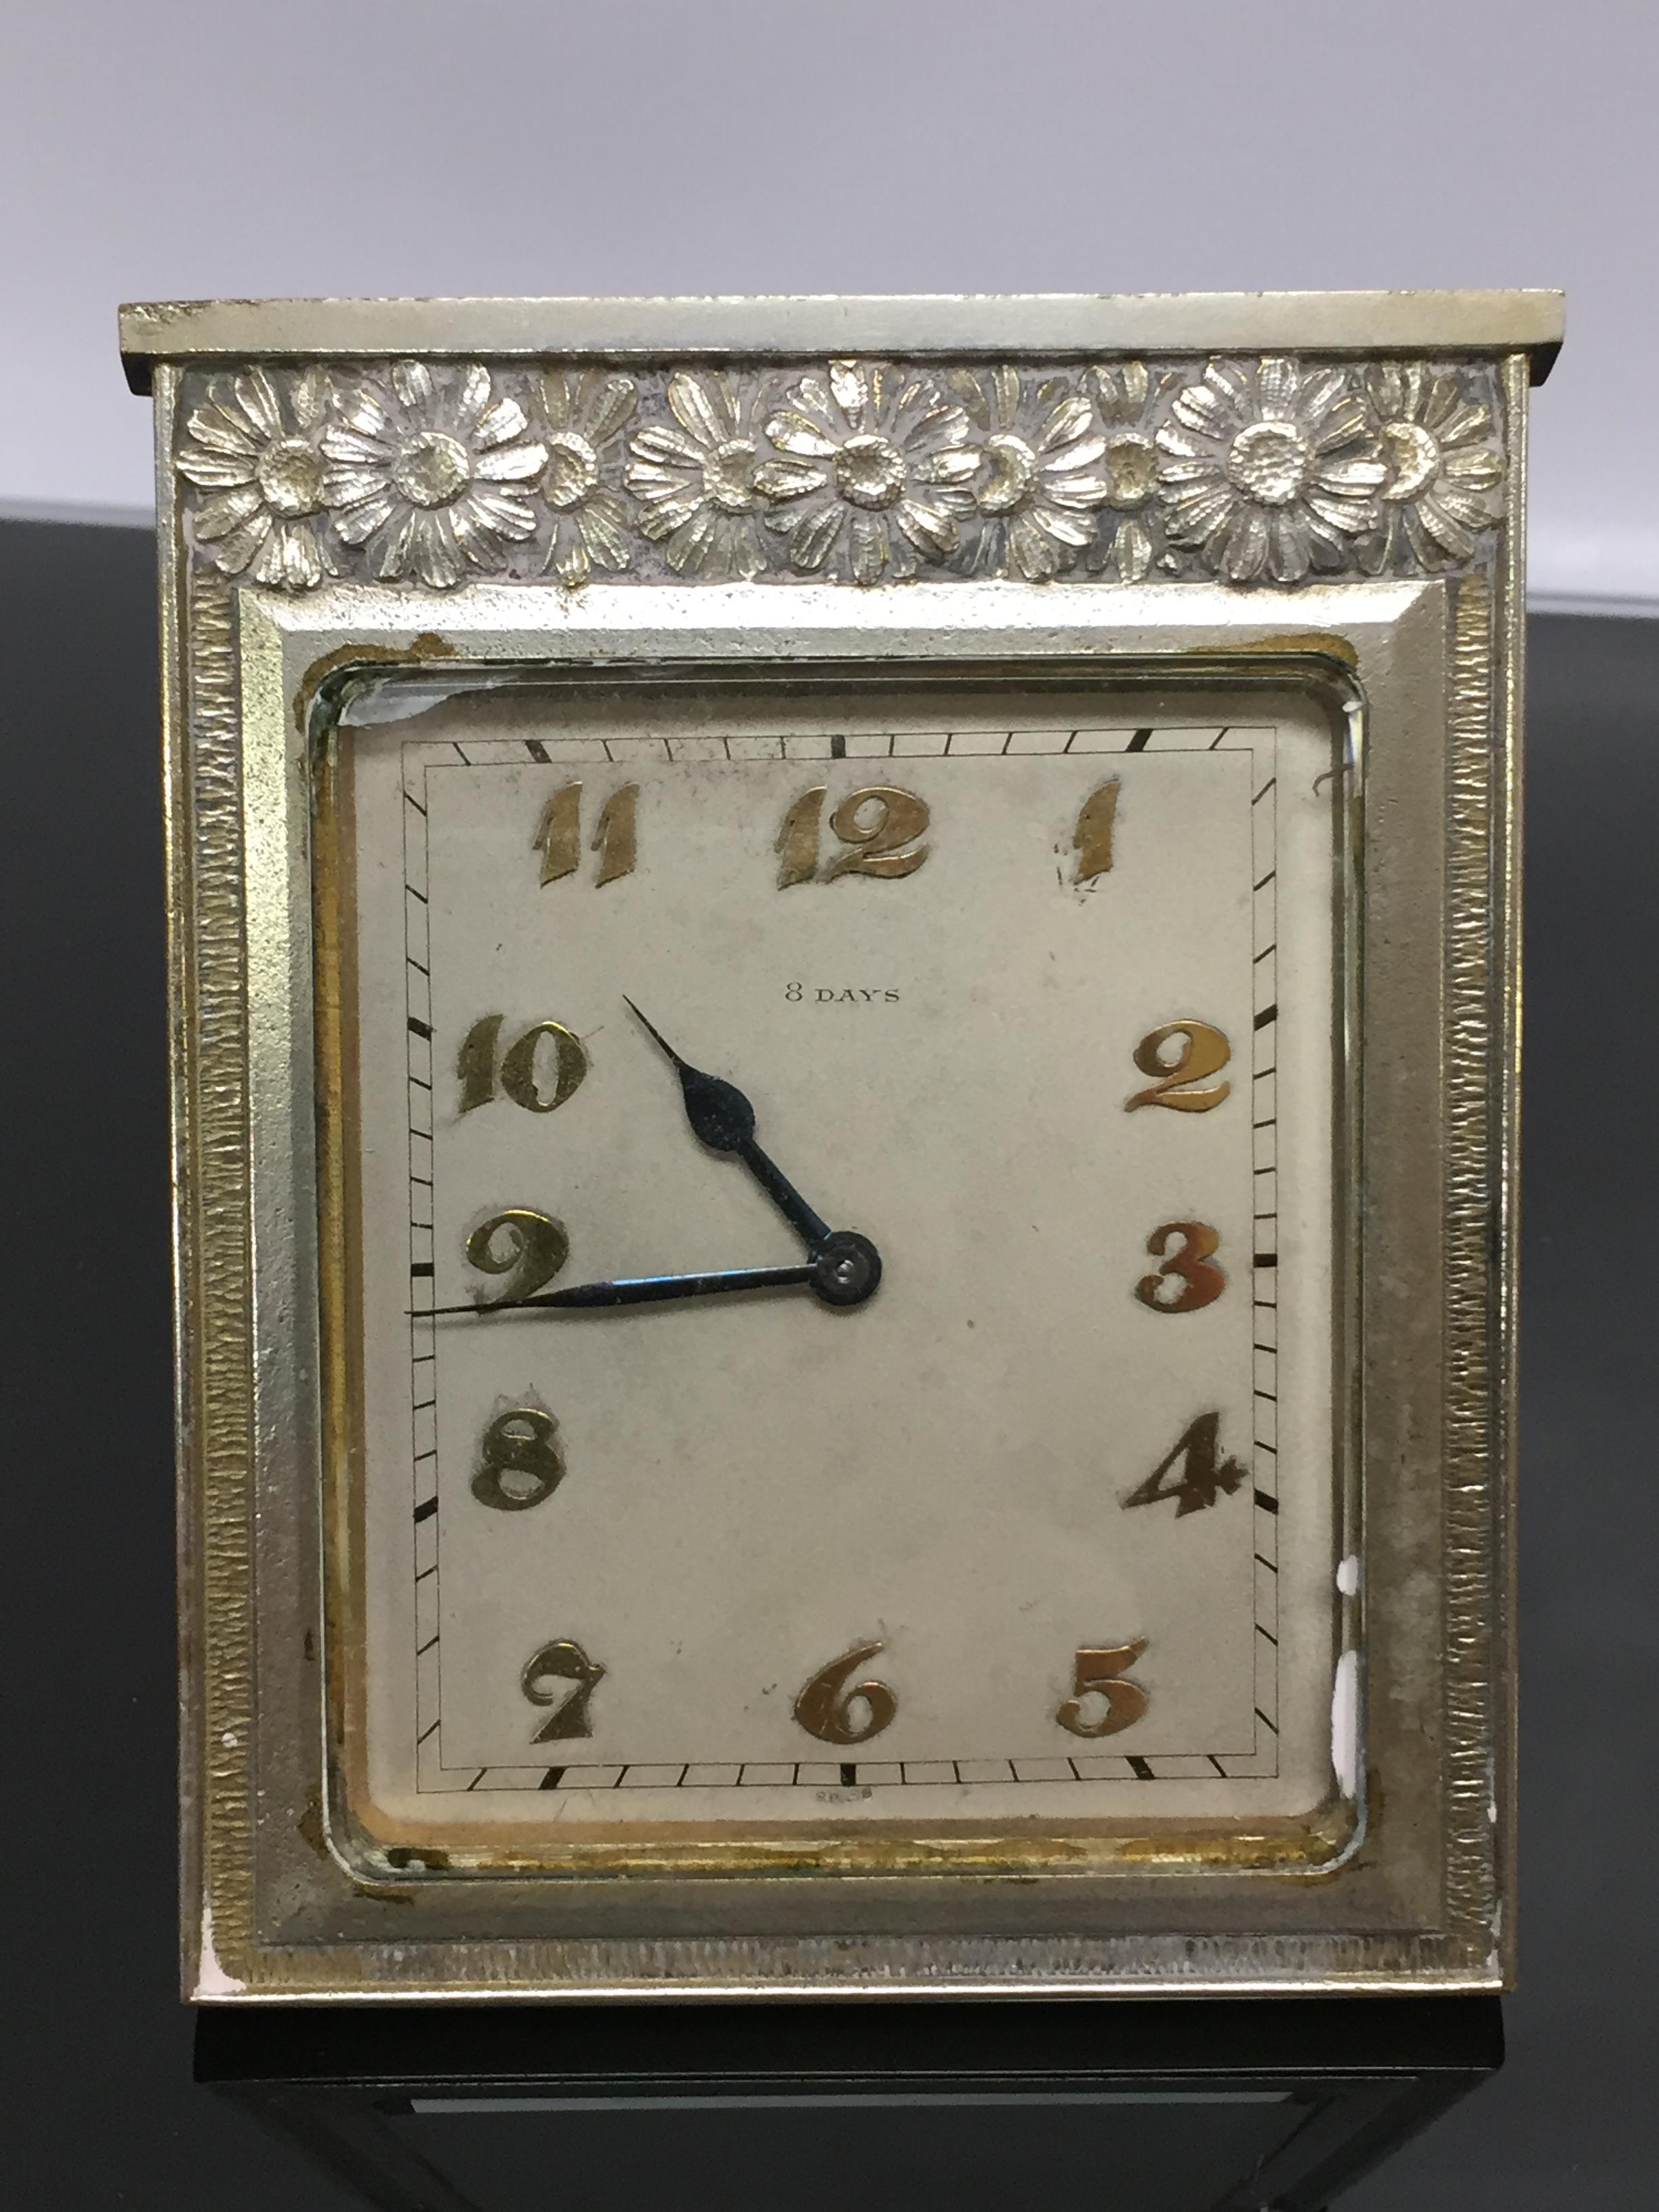 A SWISS WHITE METAL SQUARE DESK CLOCK IN ART DECO STYLE, FLORAL DECORATION TO TOP BORDER.